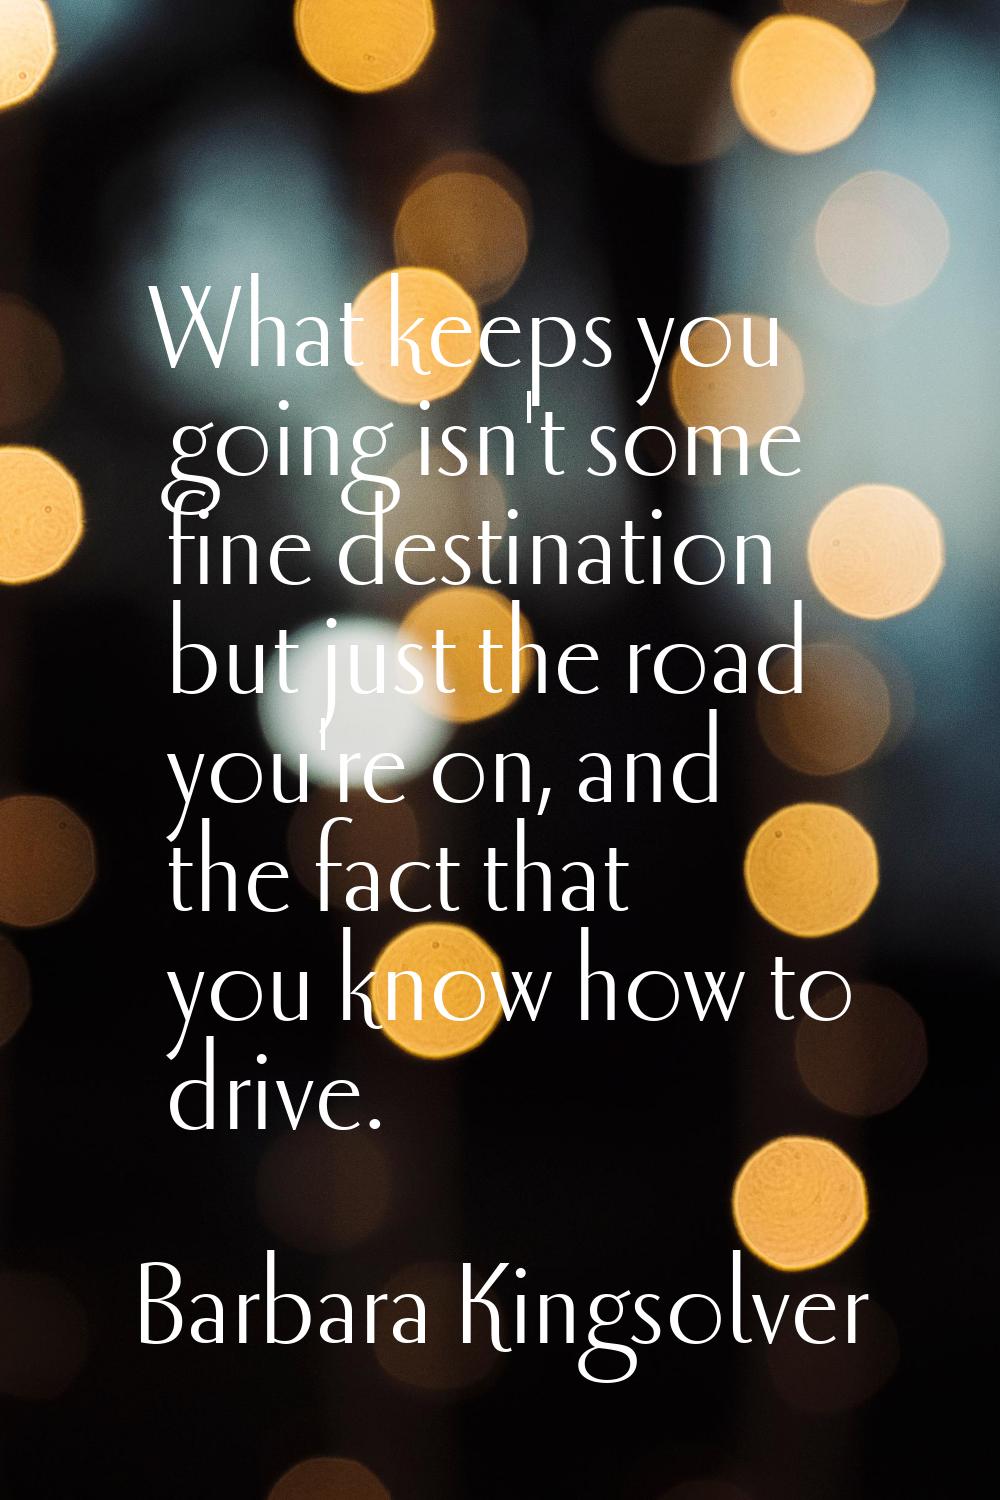 What keeps you going isn't some fine destination but just the road you're on, and the fact that you